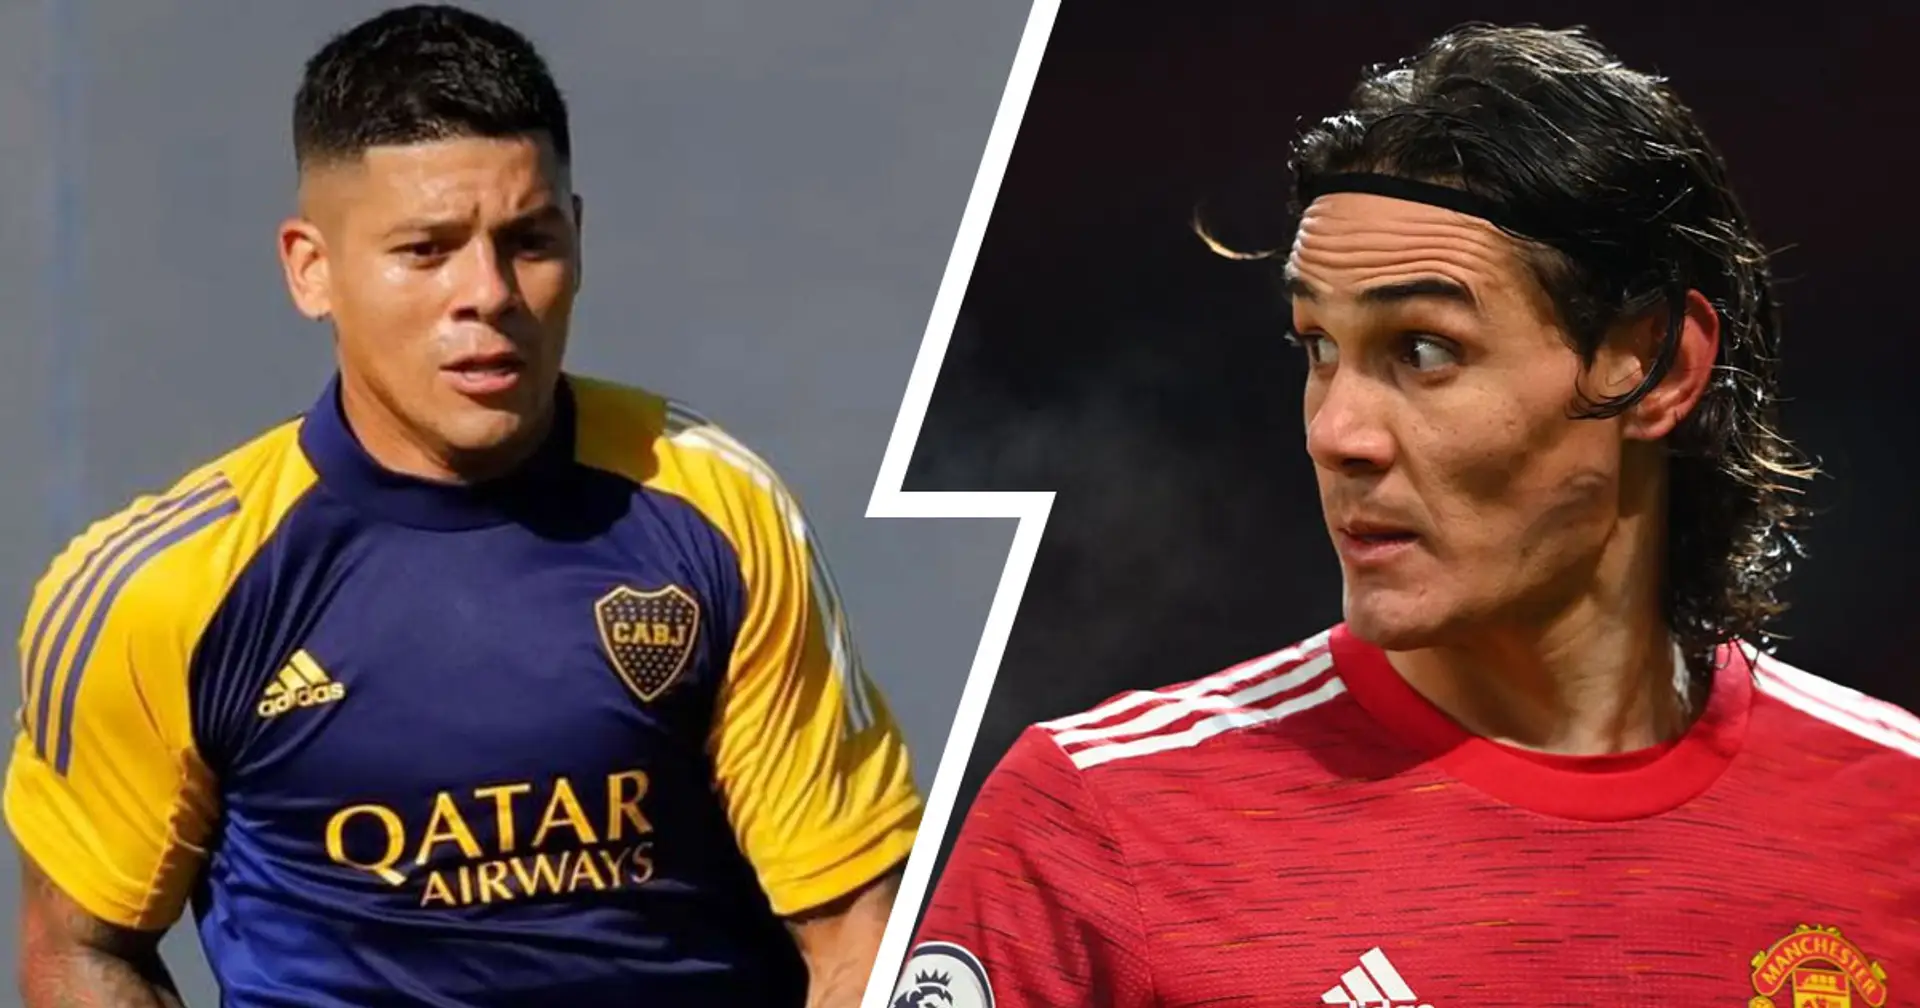 Rojo: ‘Cavani finds the option to join Boca Juniors really appealing’